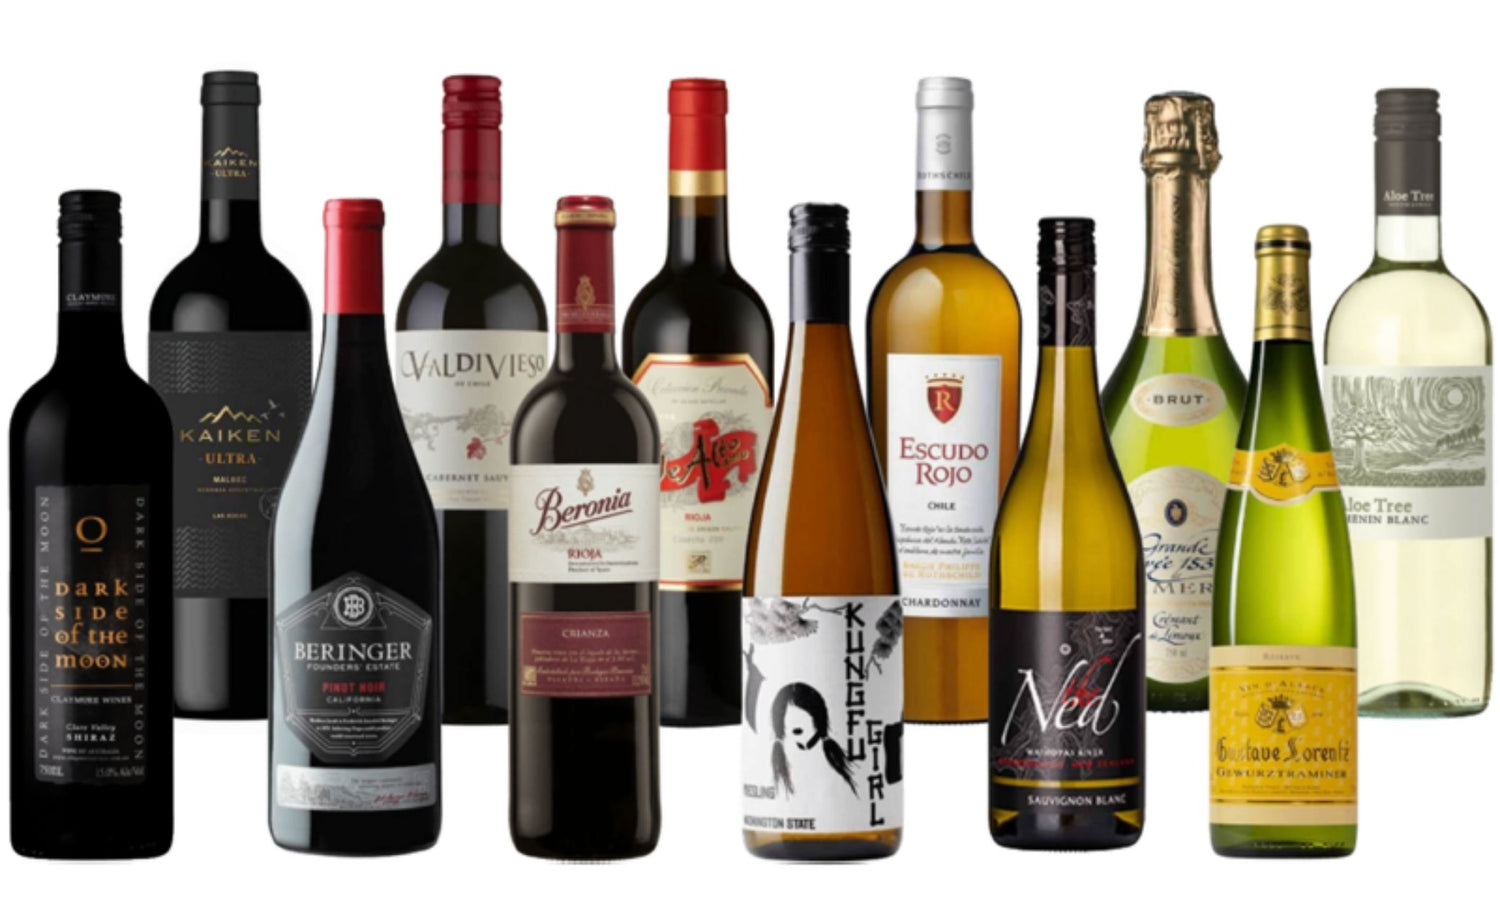 wineryph kavino choice awards bestselling wines in the philippines